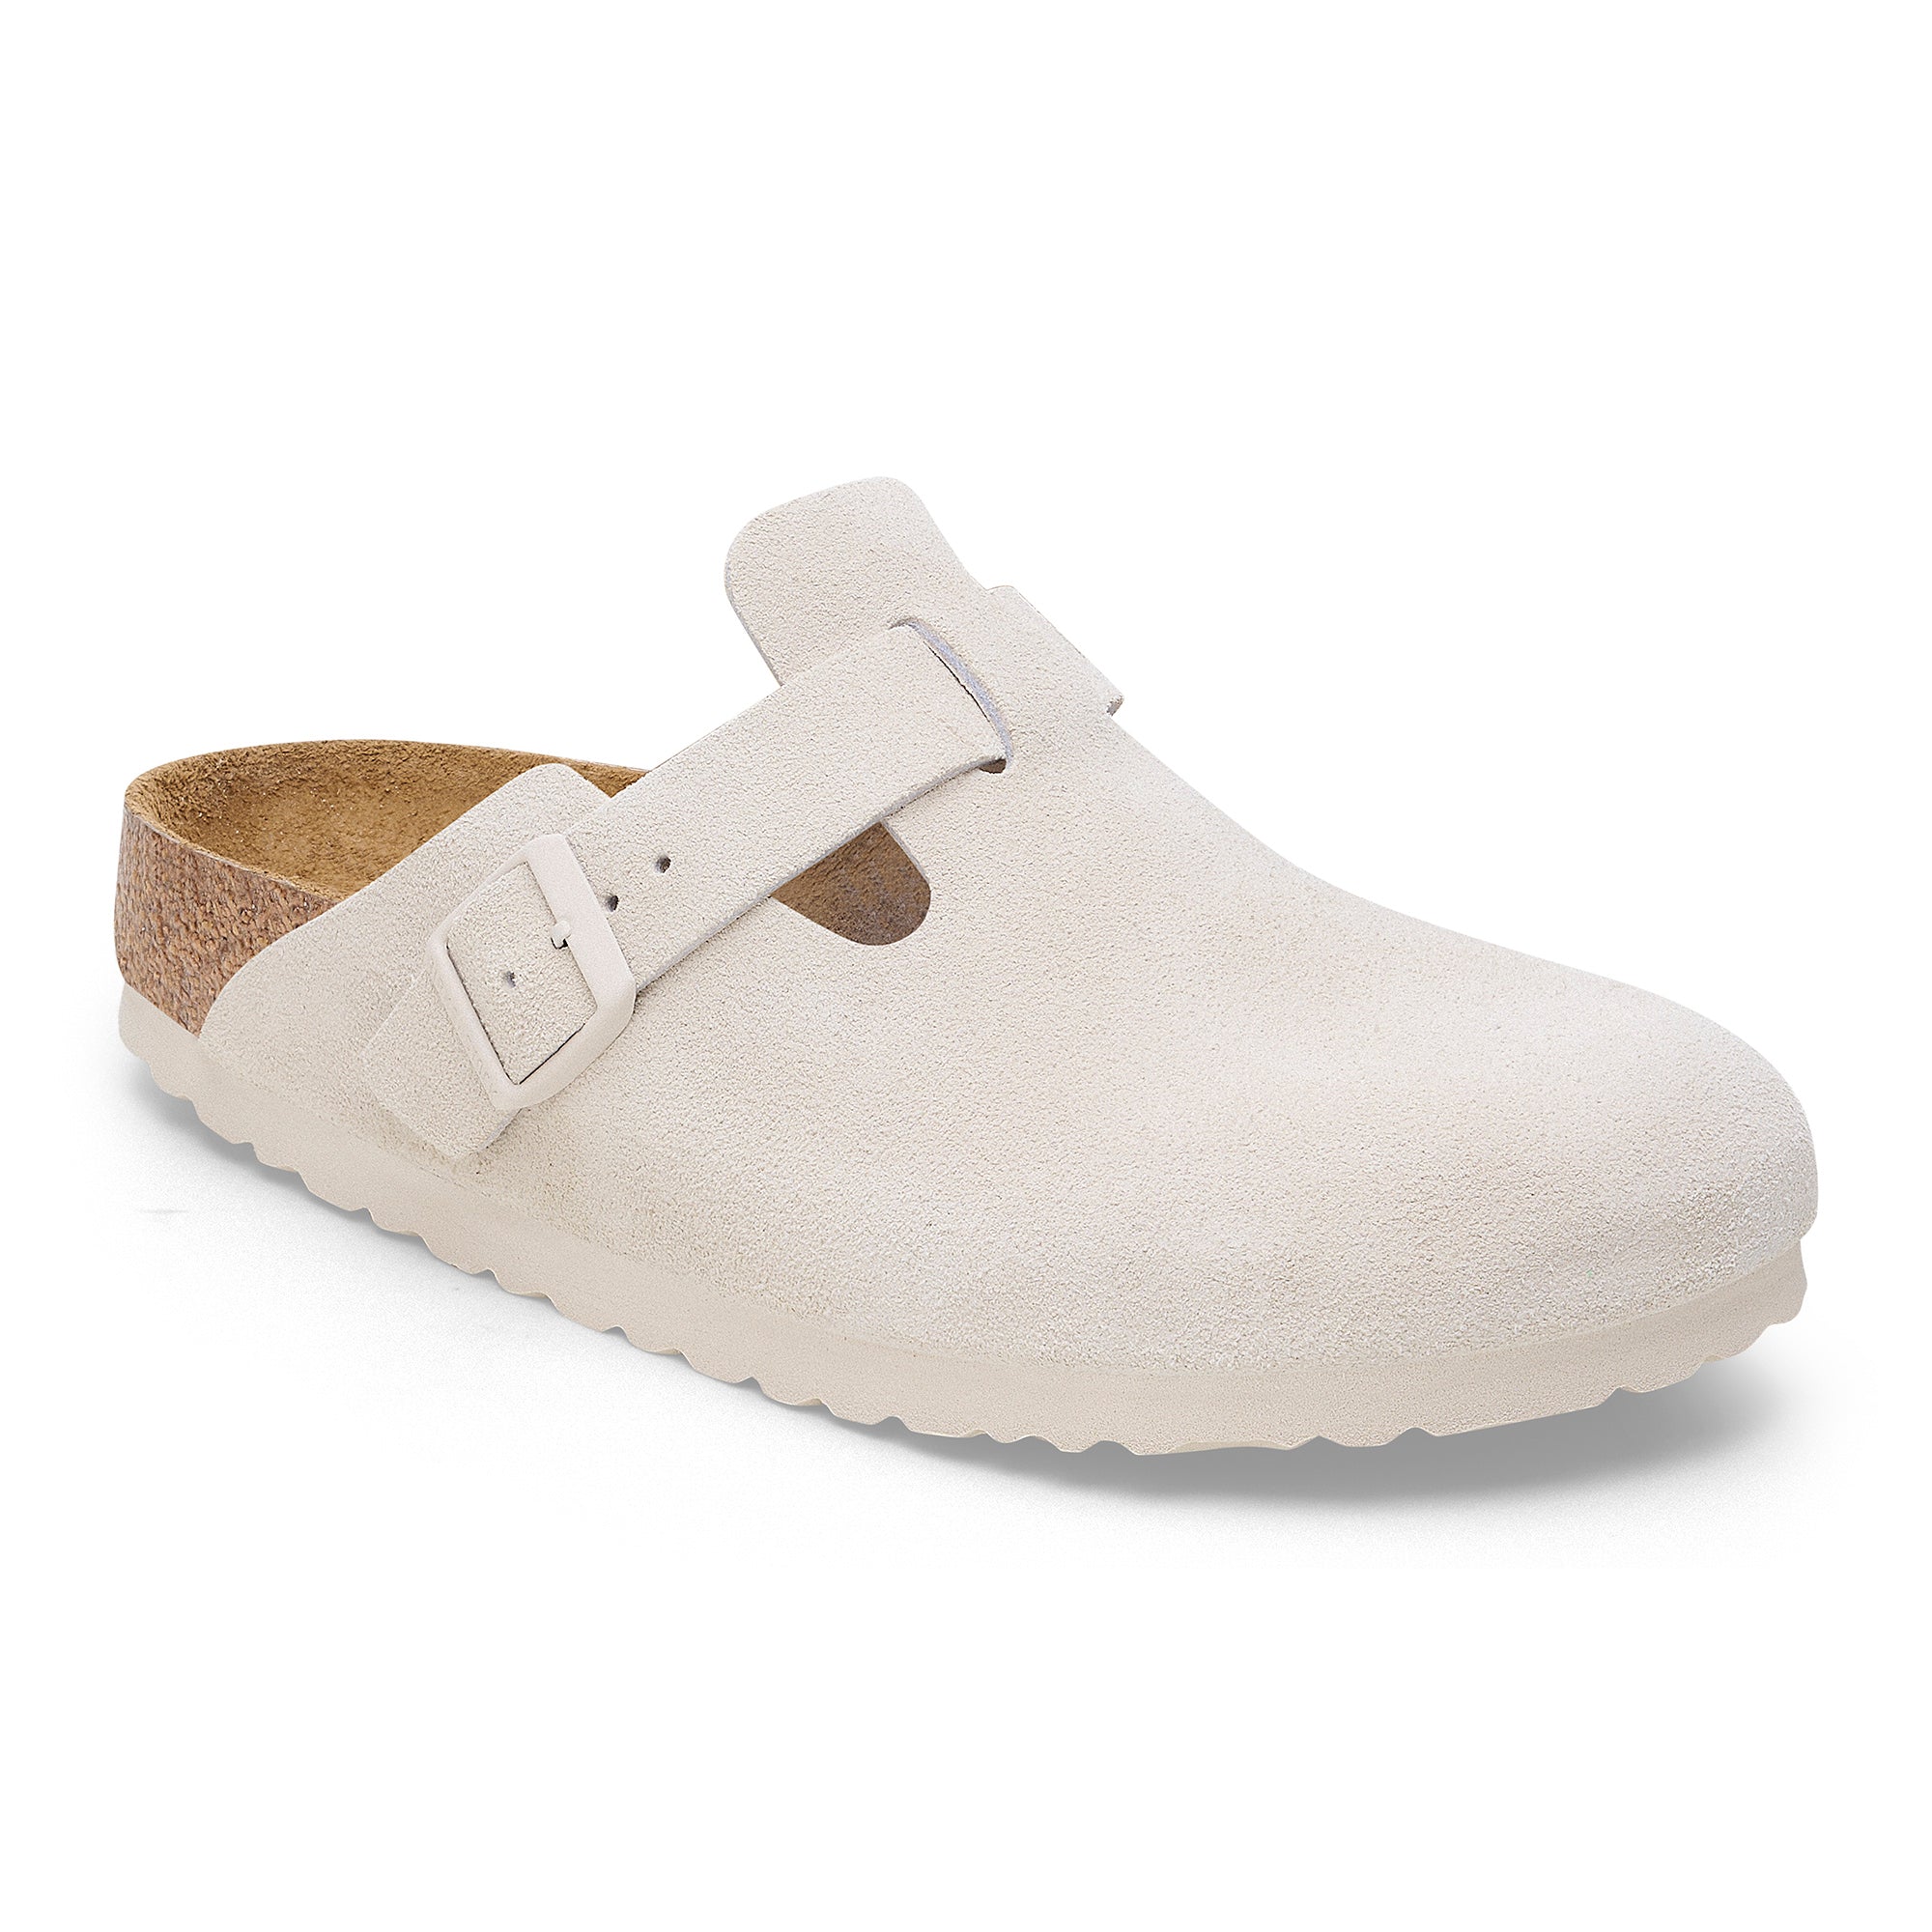 Birkenstock Limited Edition Boston Soft Footbed antique white suede